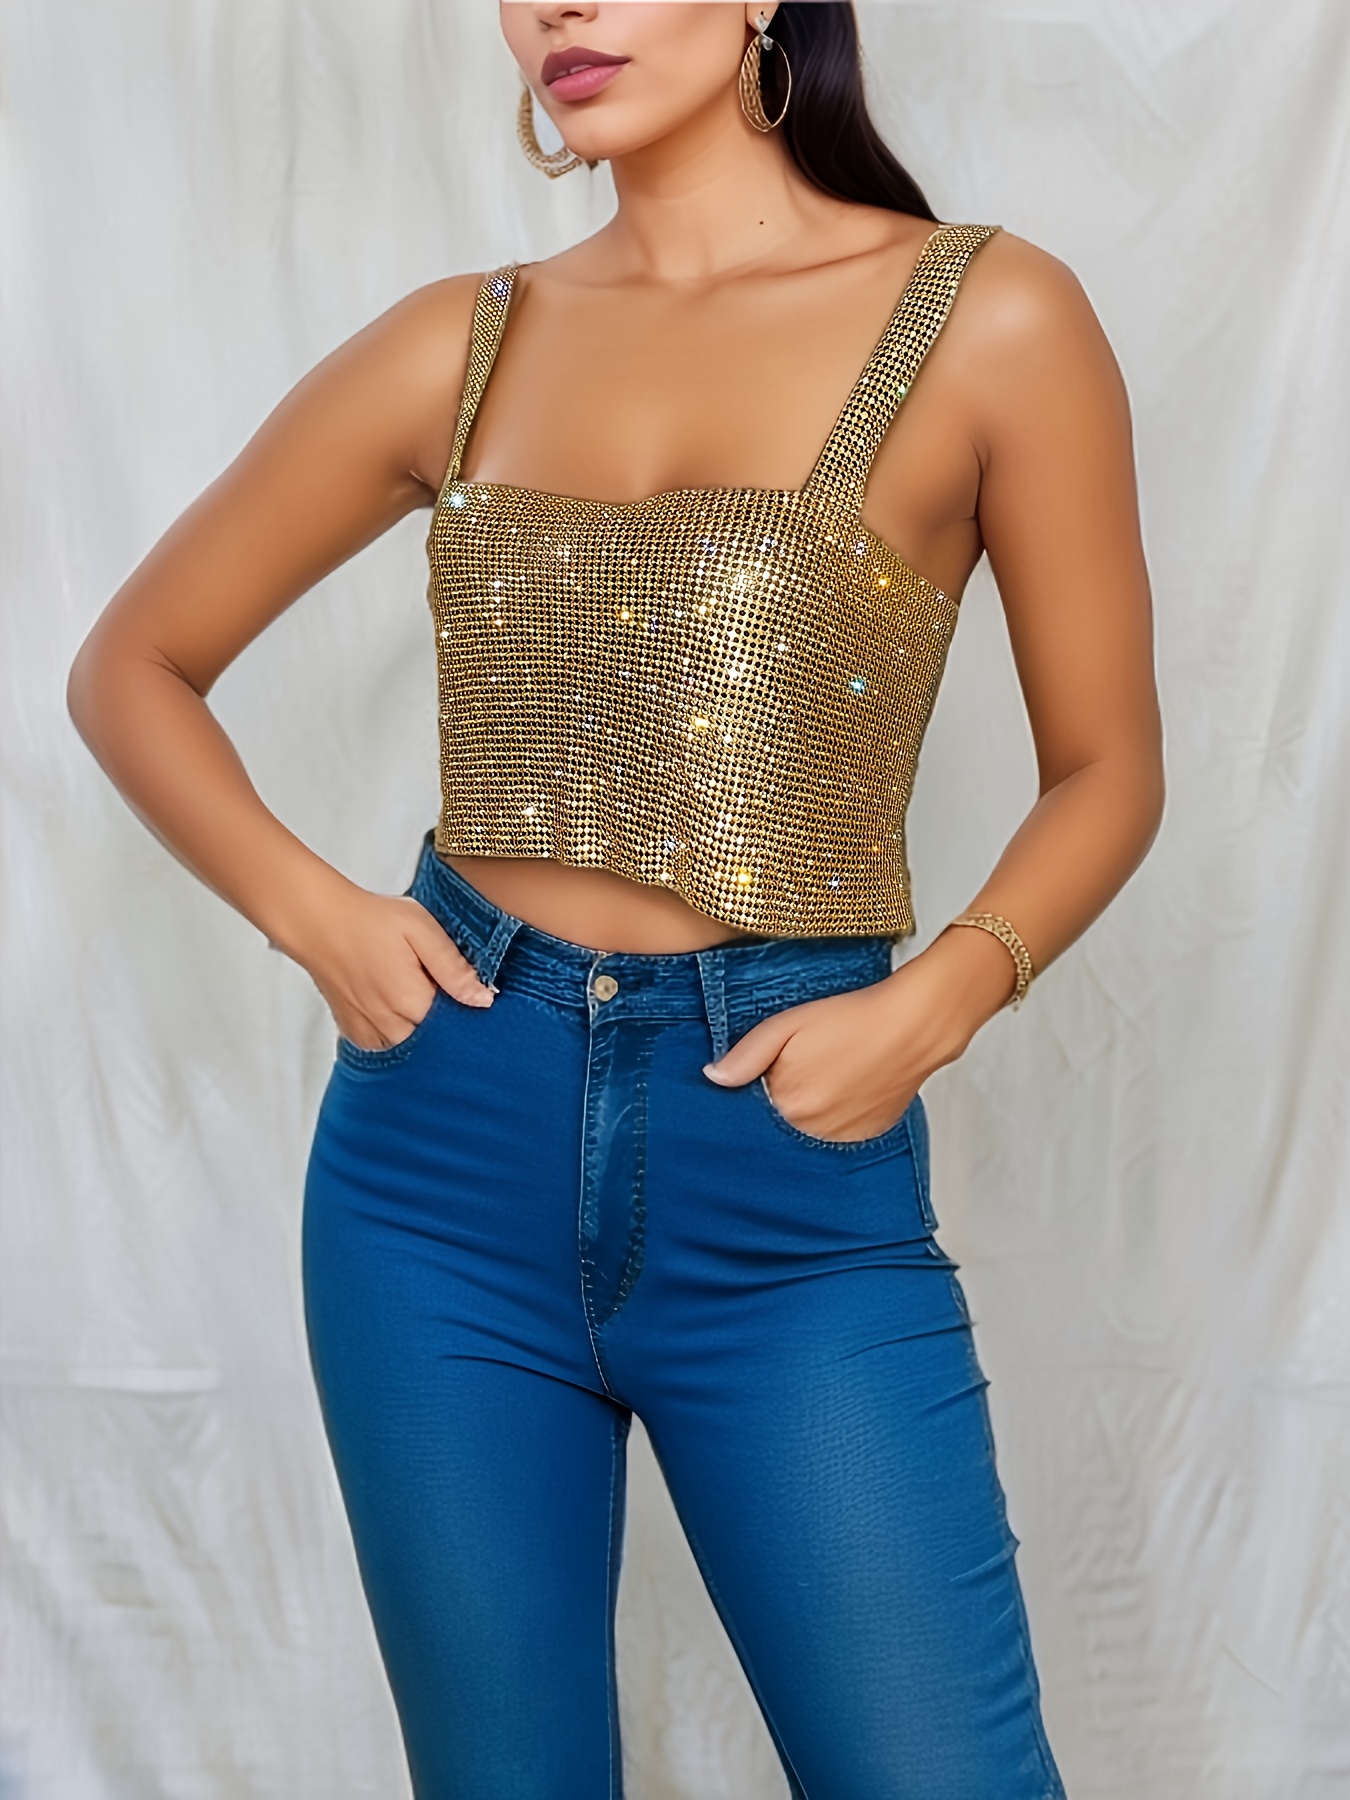 Sequin Tube Top Women Tank Crop Tube Top Off Shoulder Blouse Fashion Sequin Bra  Top Clothes for Club, Party, Belly Dance, Festival Black 